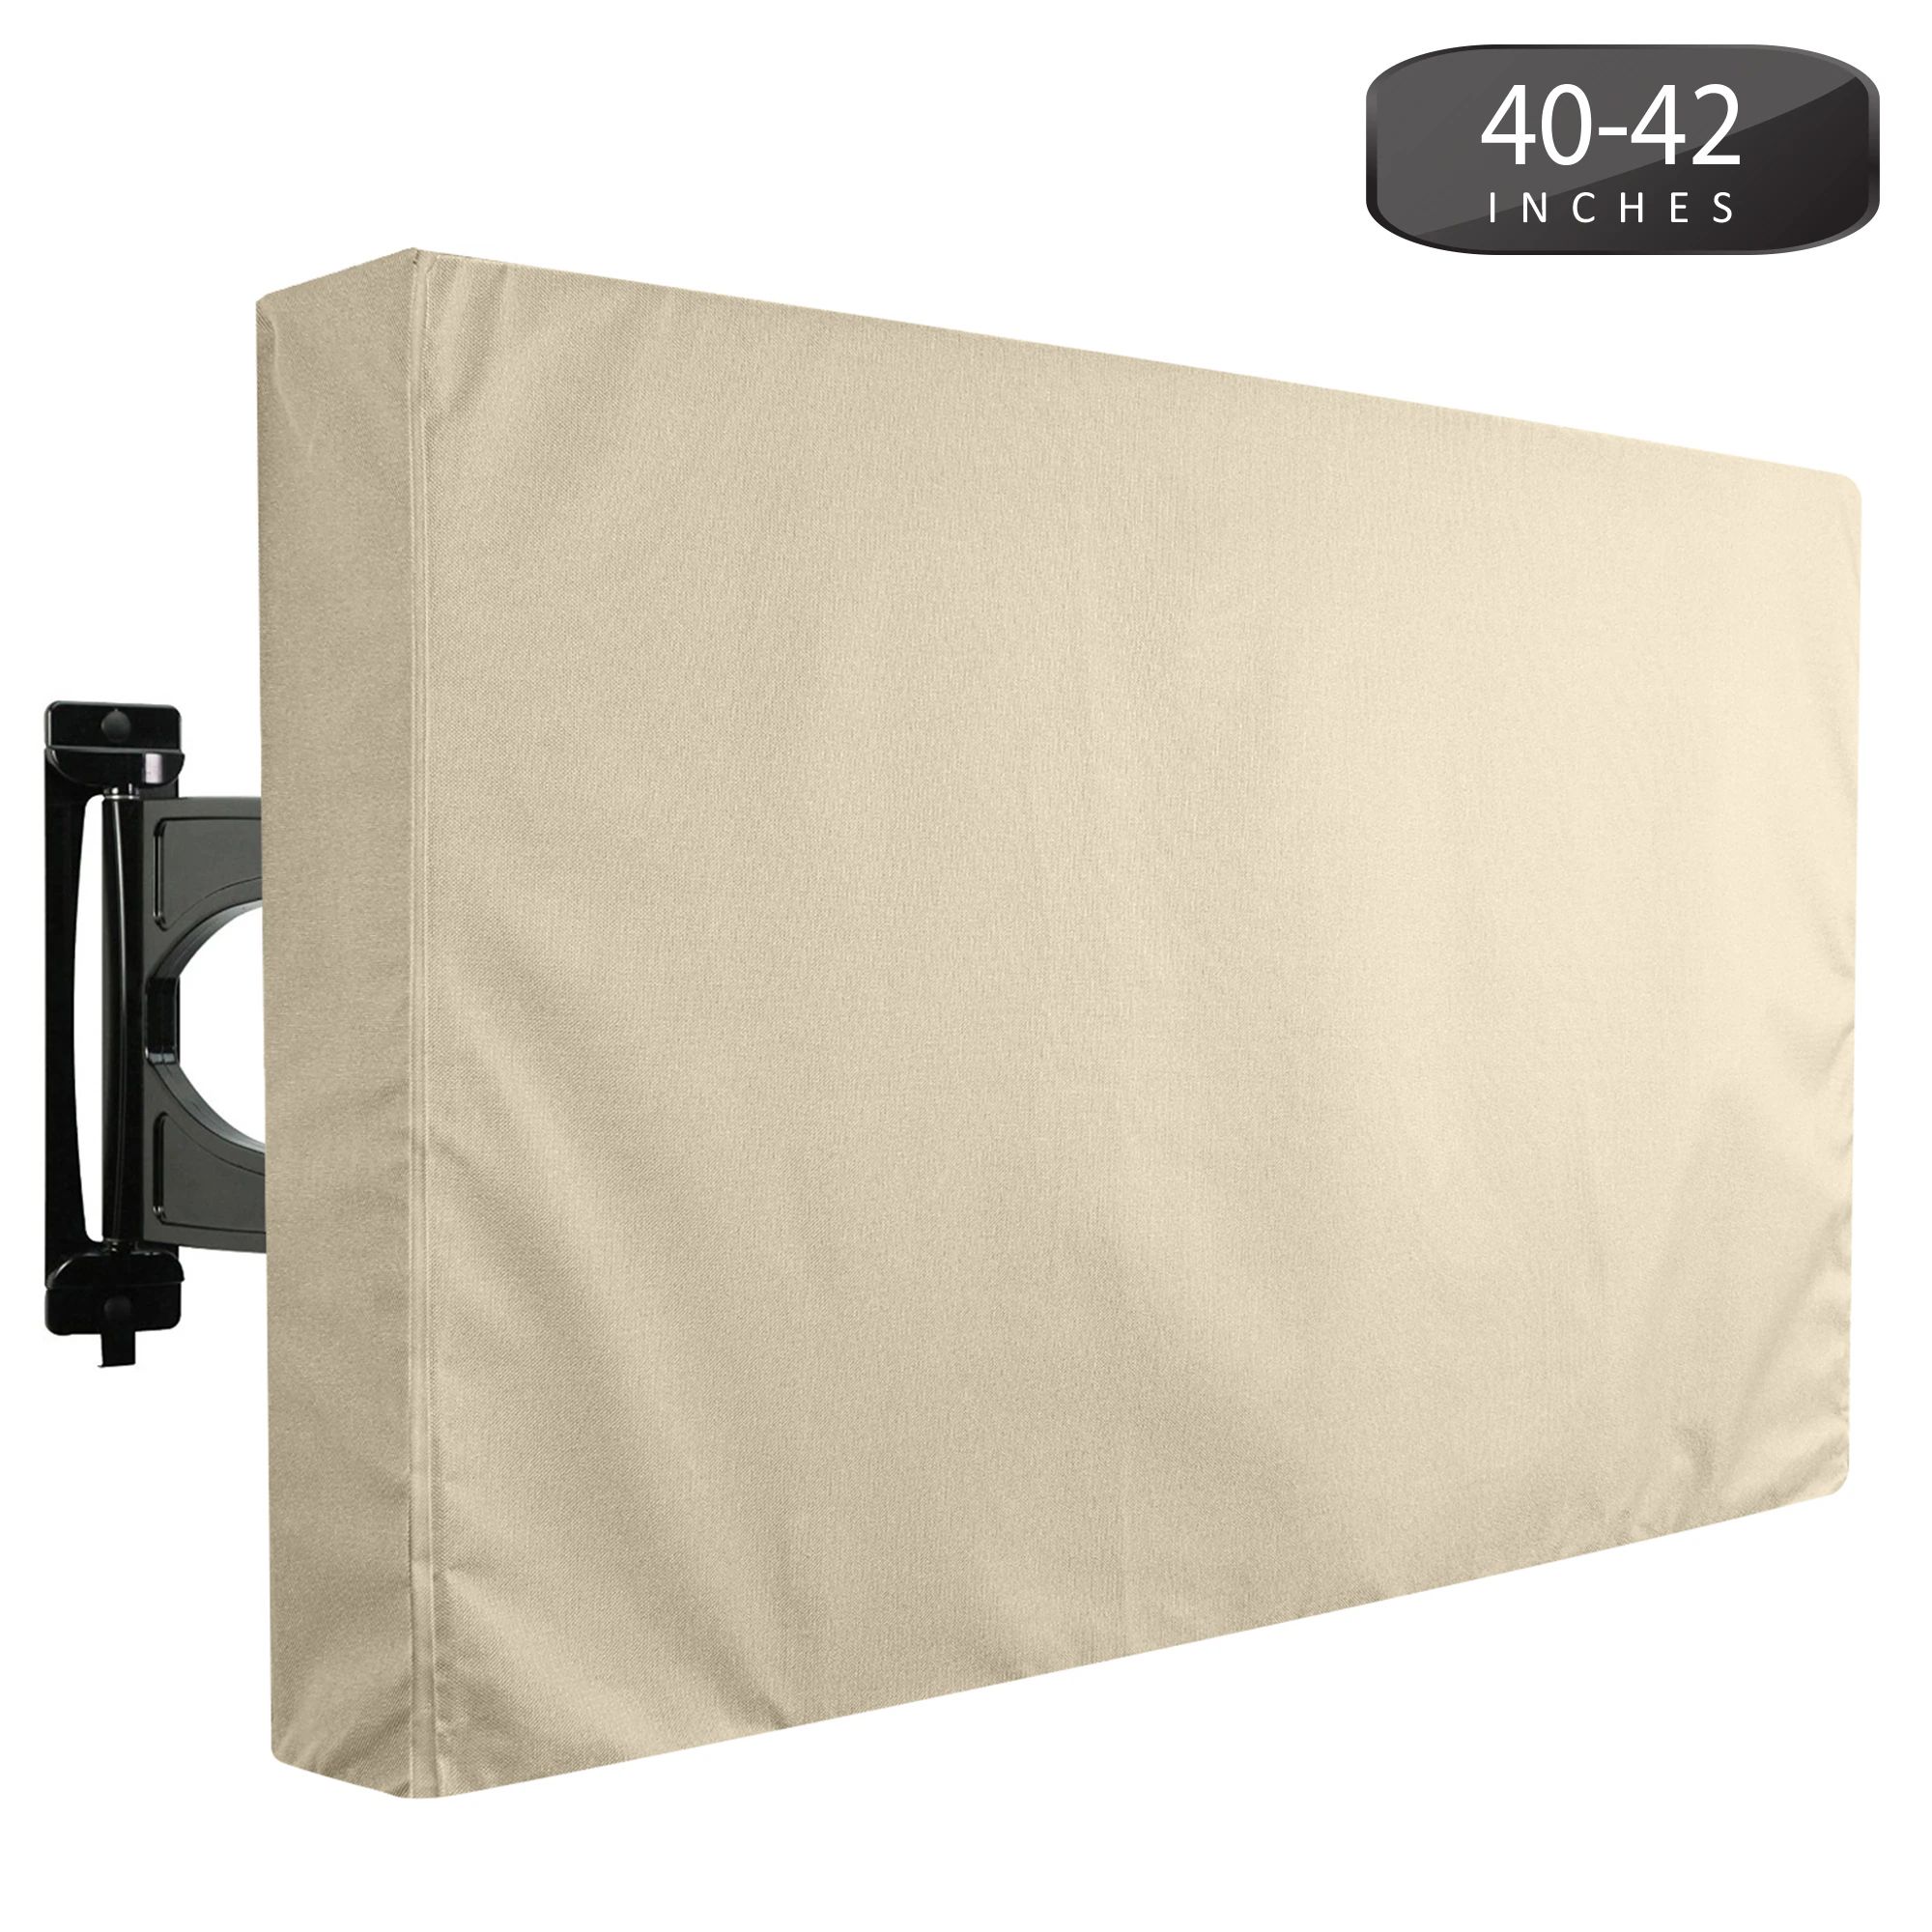 KHOMO GEAR Beige Polyester 37-in W x 24-in H Outdoor TV Cover | Lowe's